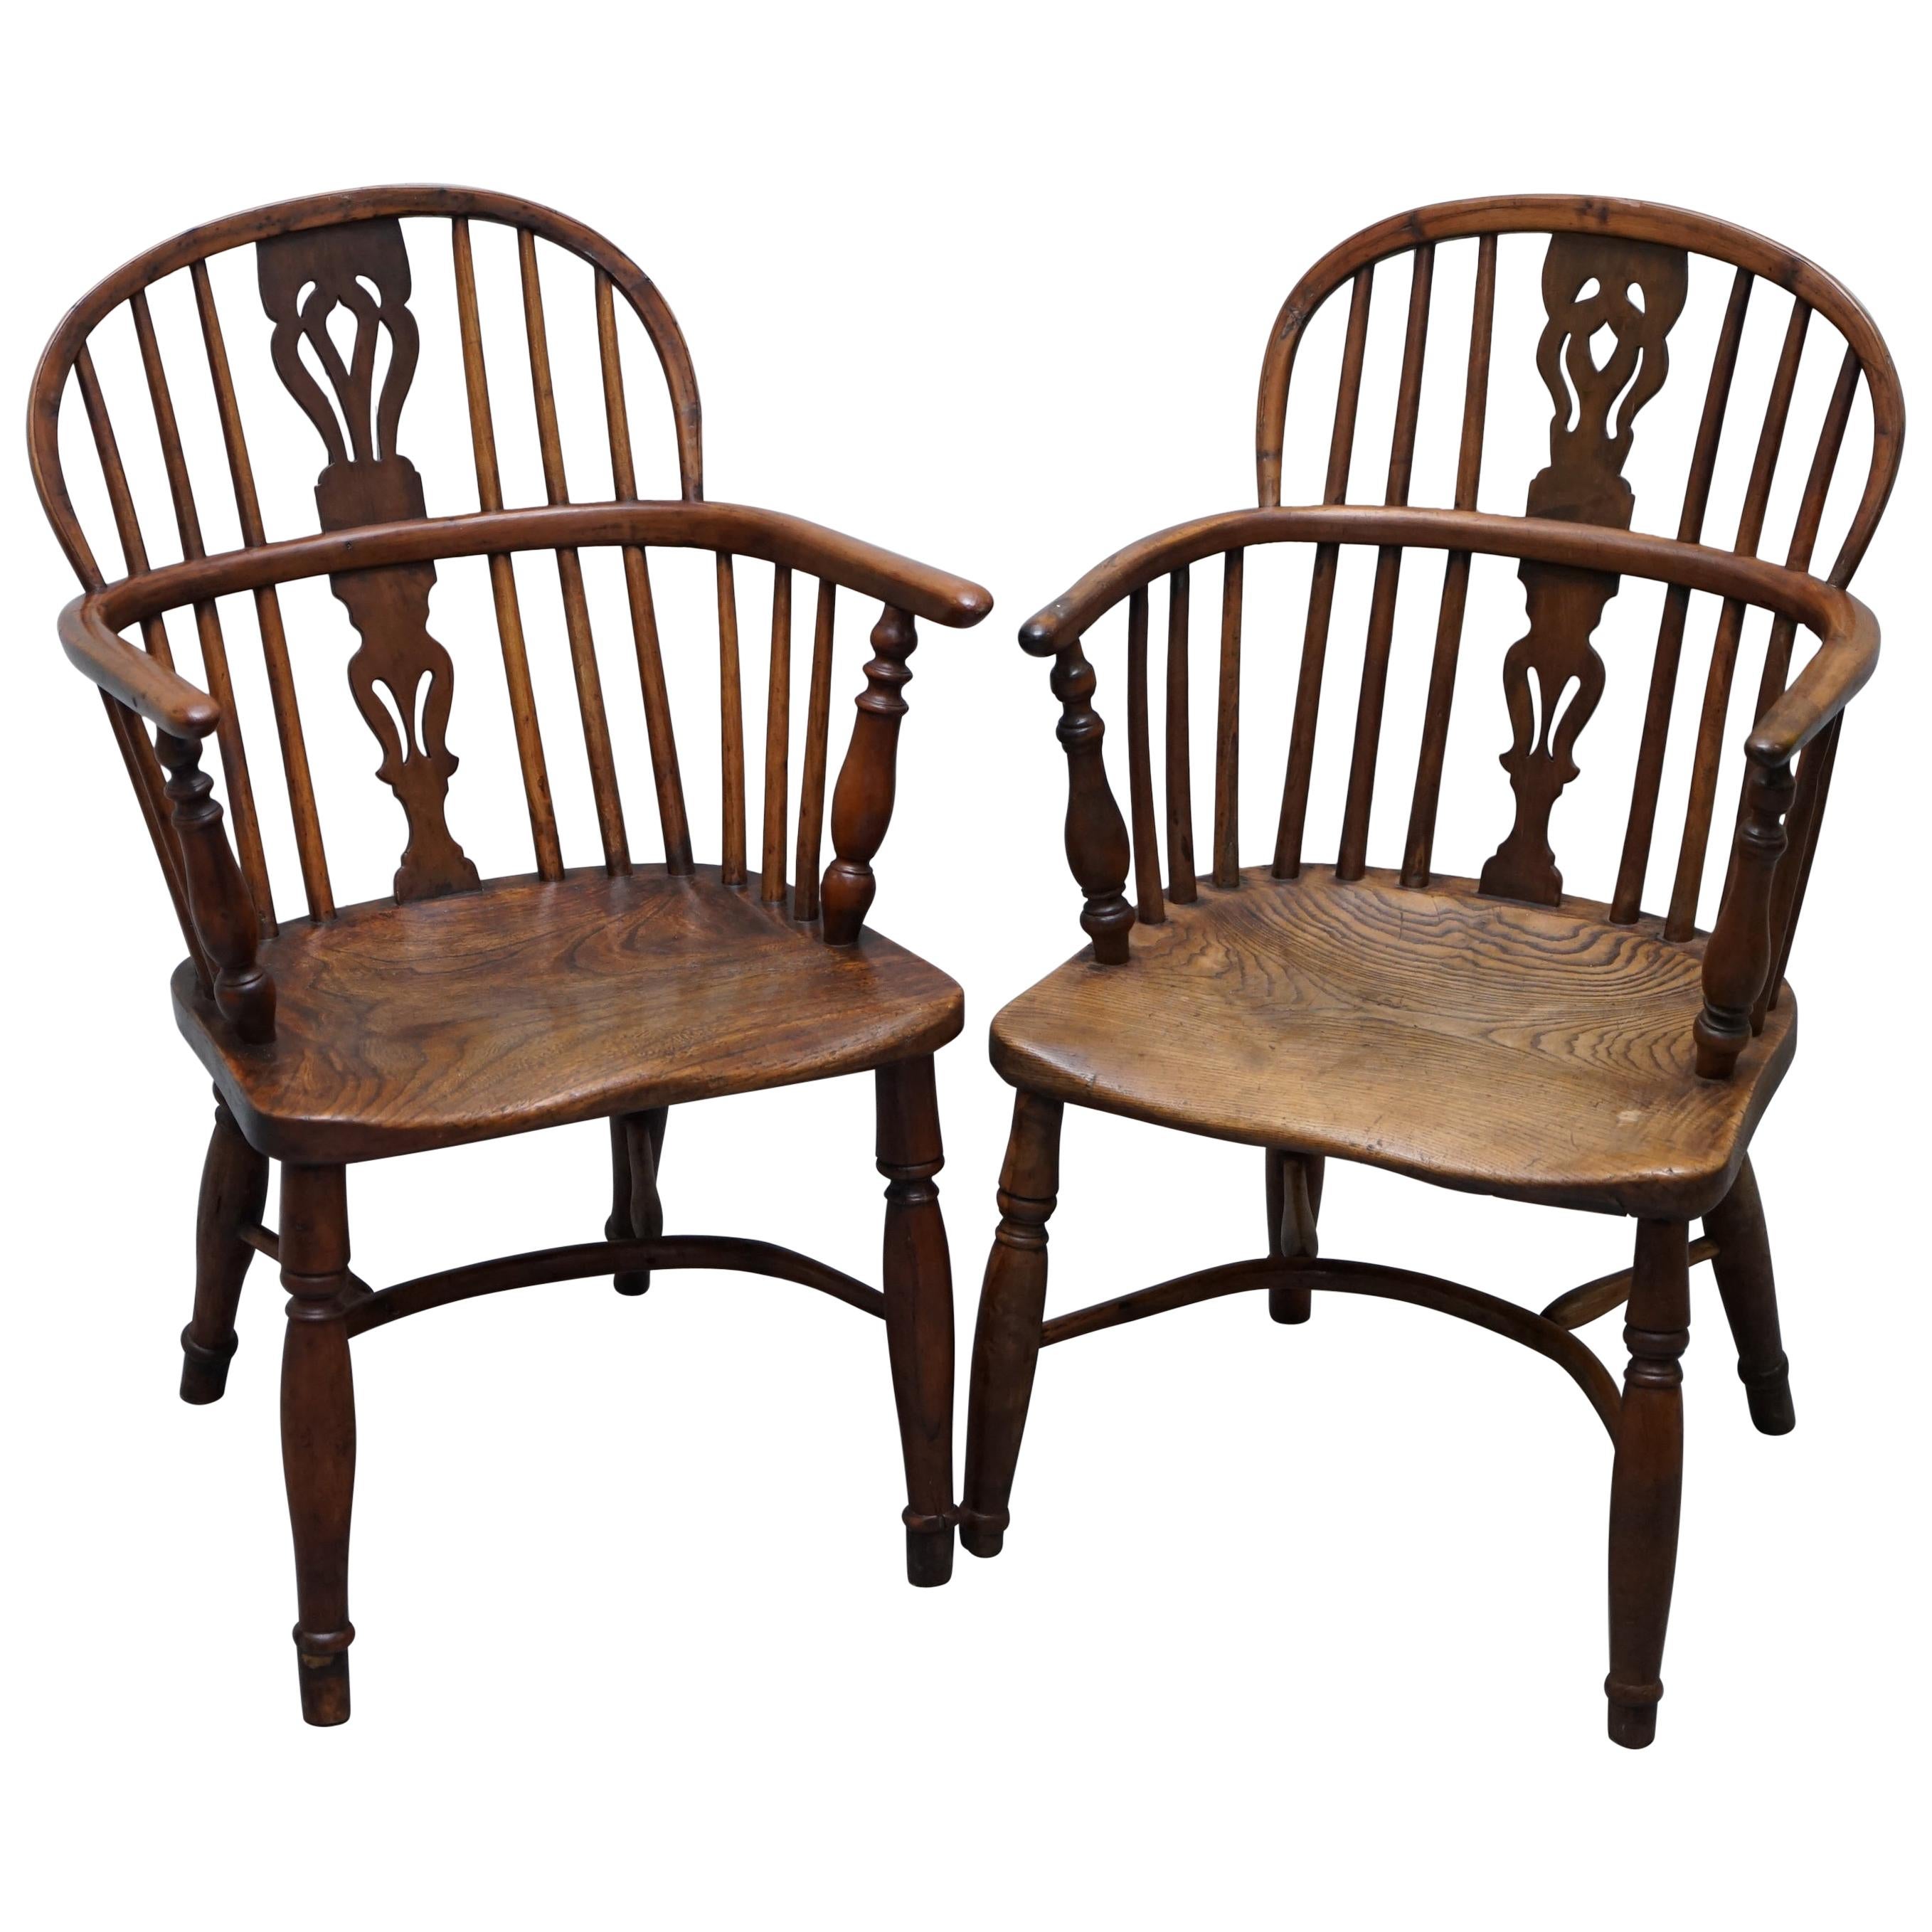 Two Early 19th Century Burr Yew Wood & Elm Windsor Armchairs Part Set of Four